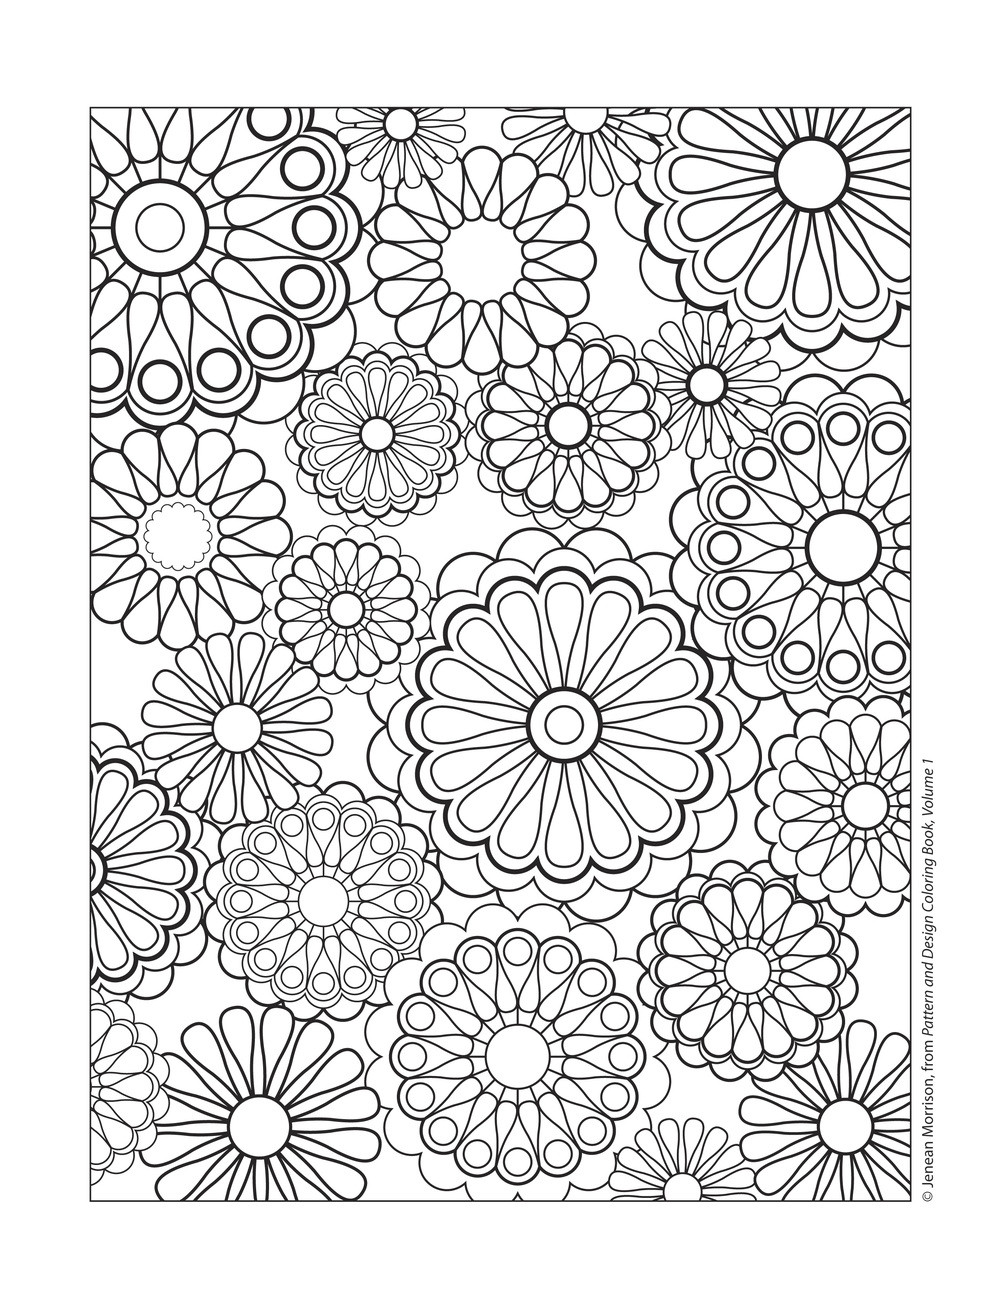 Pattern Coloring Pages For Kids
 Kaleidoscope Coloring Pages Printable Coloring For Kids 2019